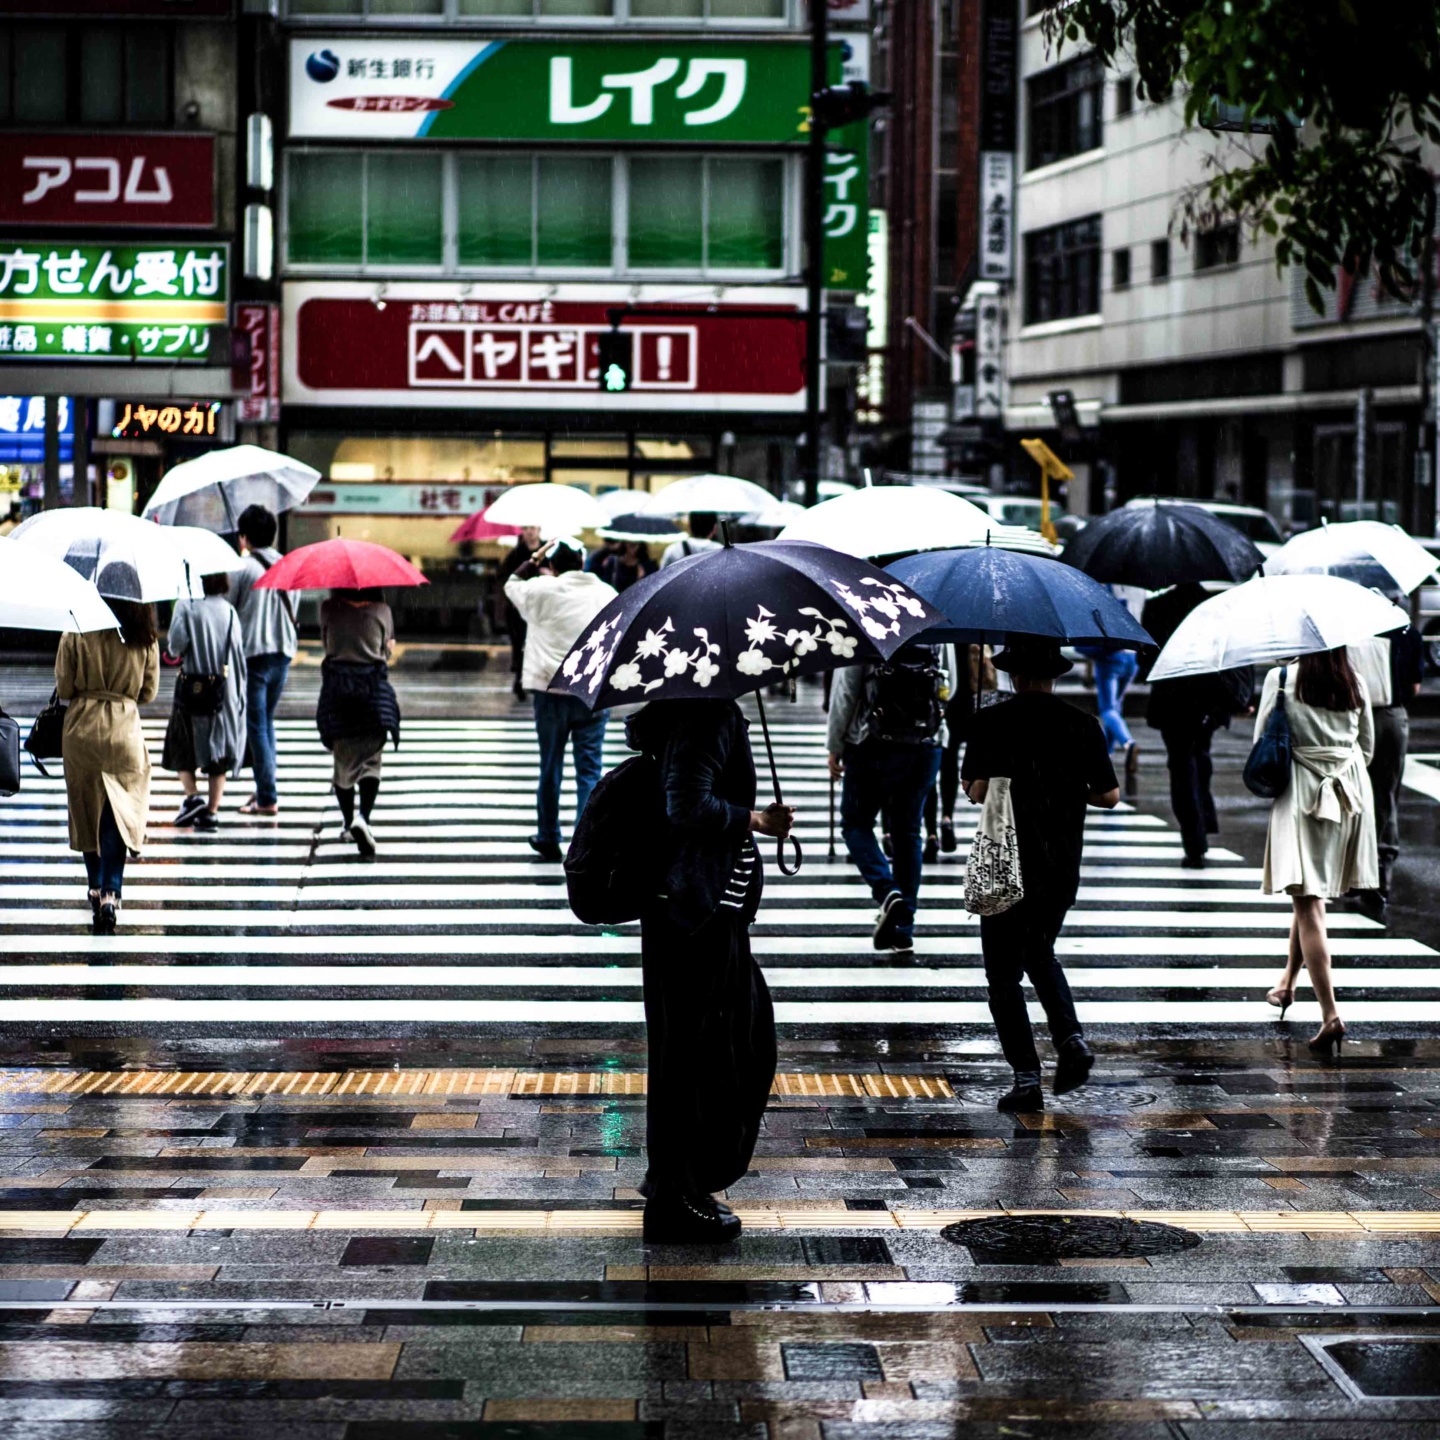 Focal Point: A Rainy Day in Tokyo